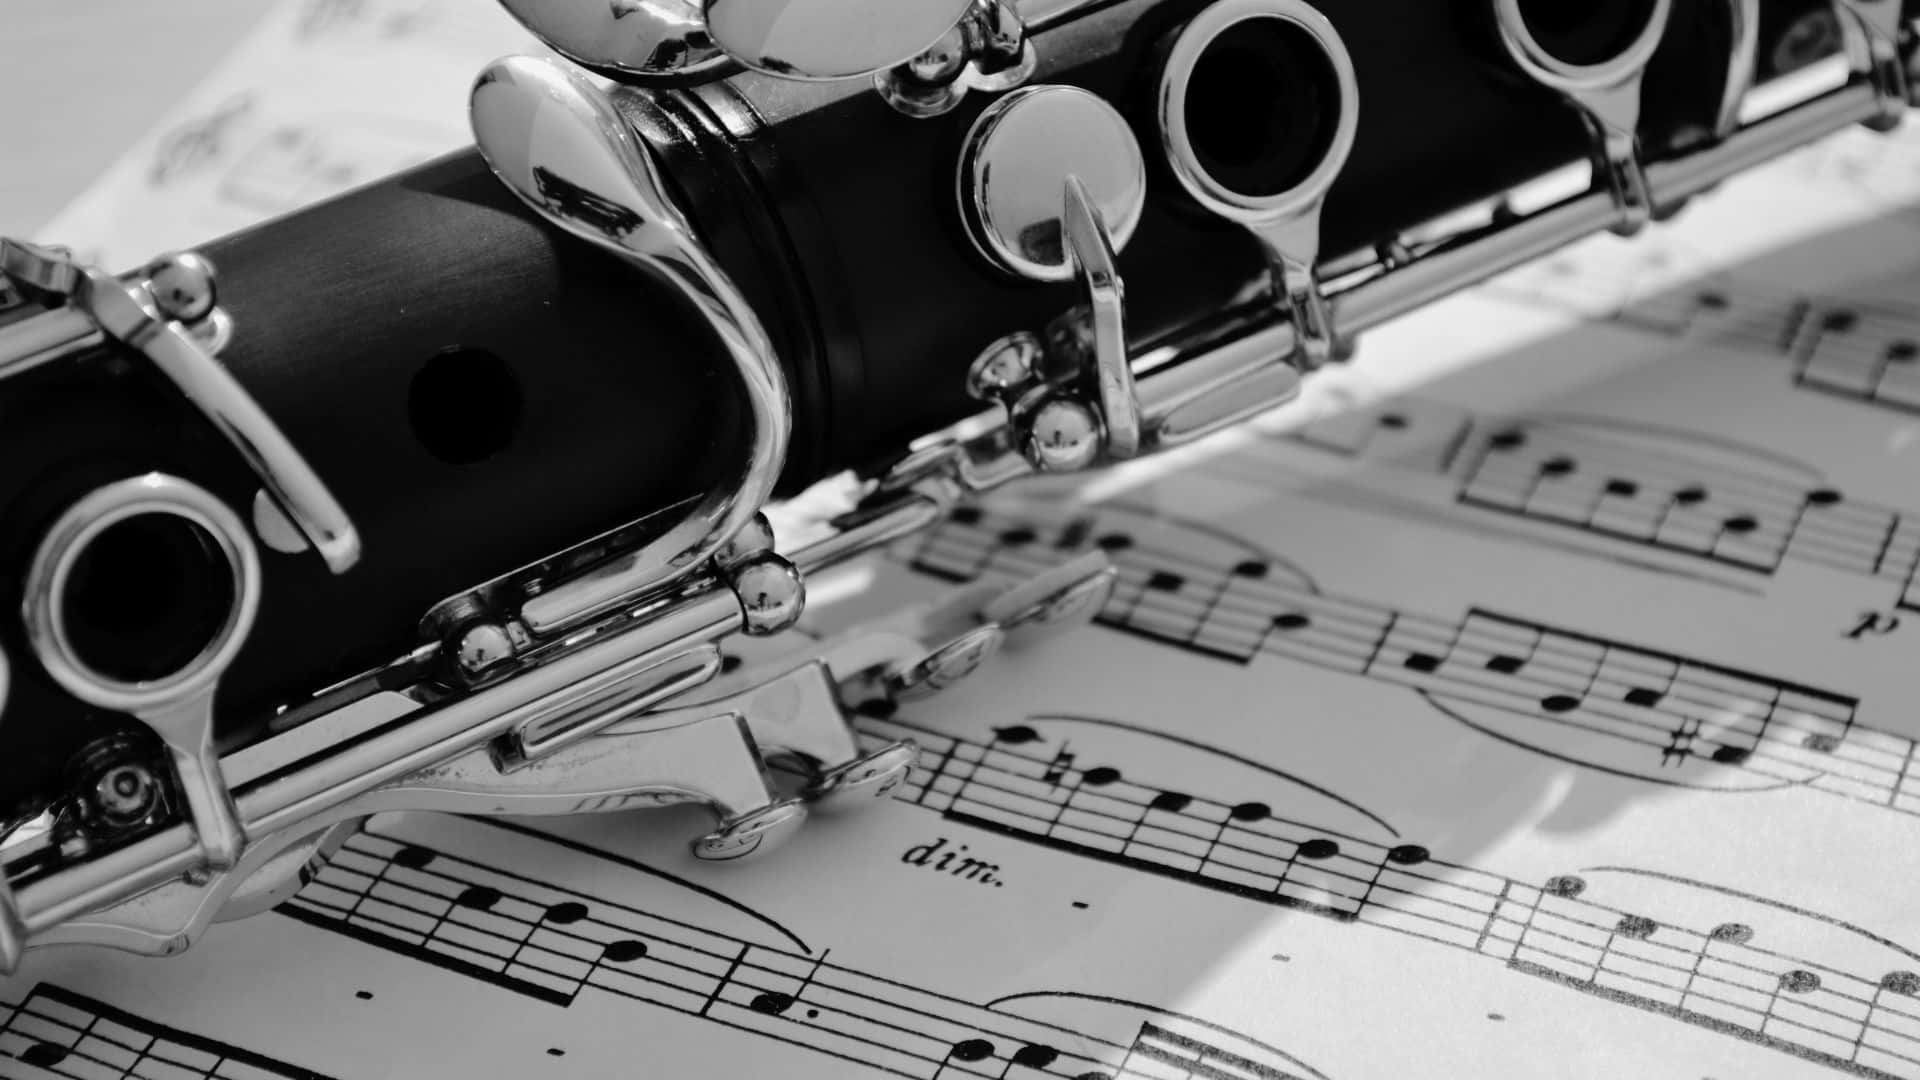 Caption: A visually striking black and white image of music notes and a treble clef sign flowing atop a piano keyboard. Wallpaper